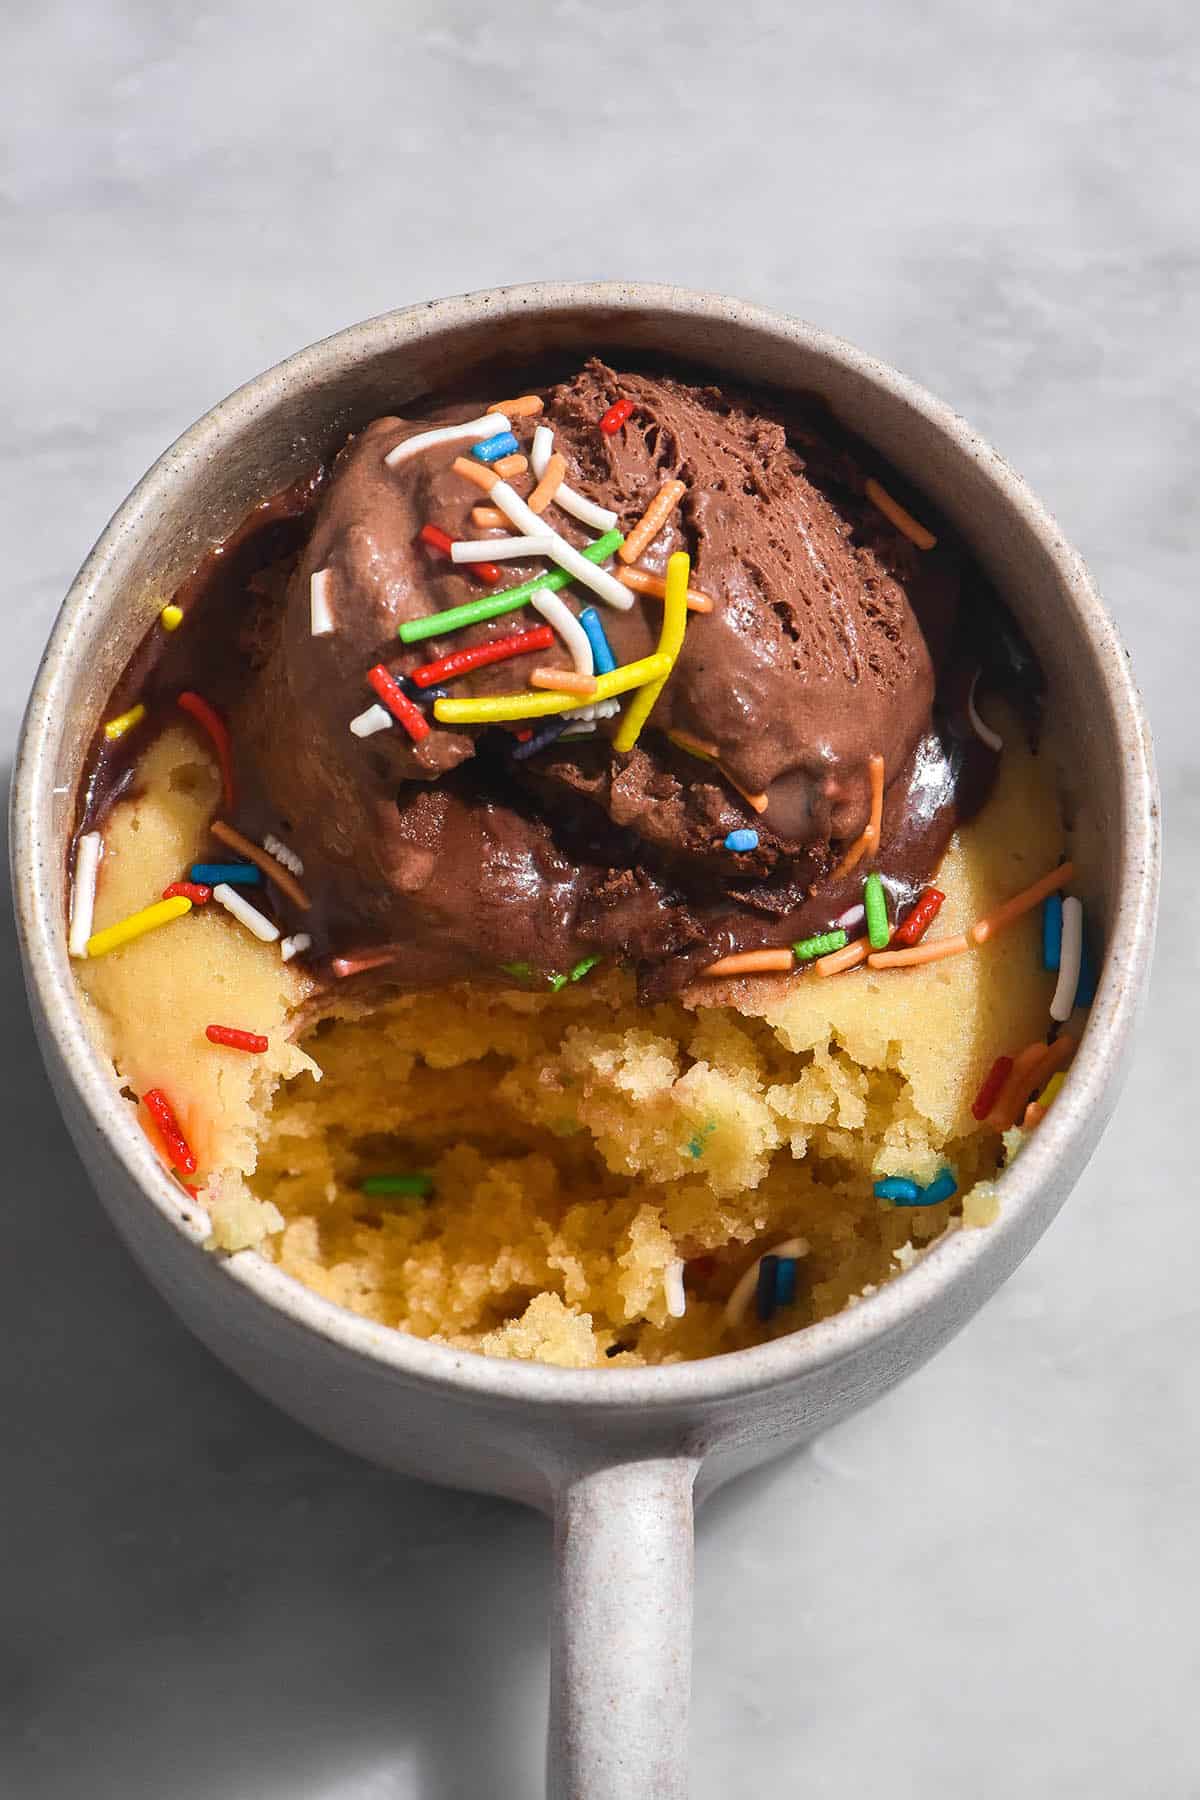 An aerial image of a gluten free vanilla mug cake topped with chocolate ice cream and rainbow sprinkles. The mug cake is in a white speckled ceramic mug on a white marble table